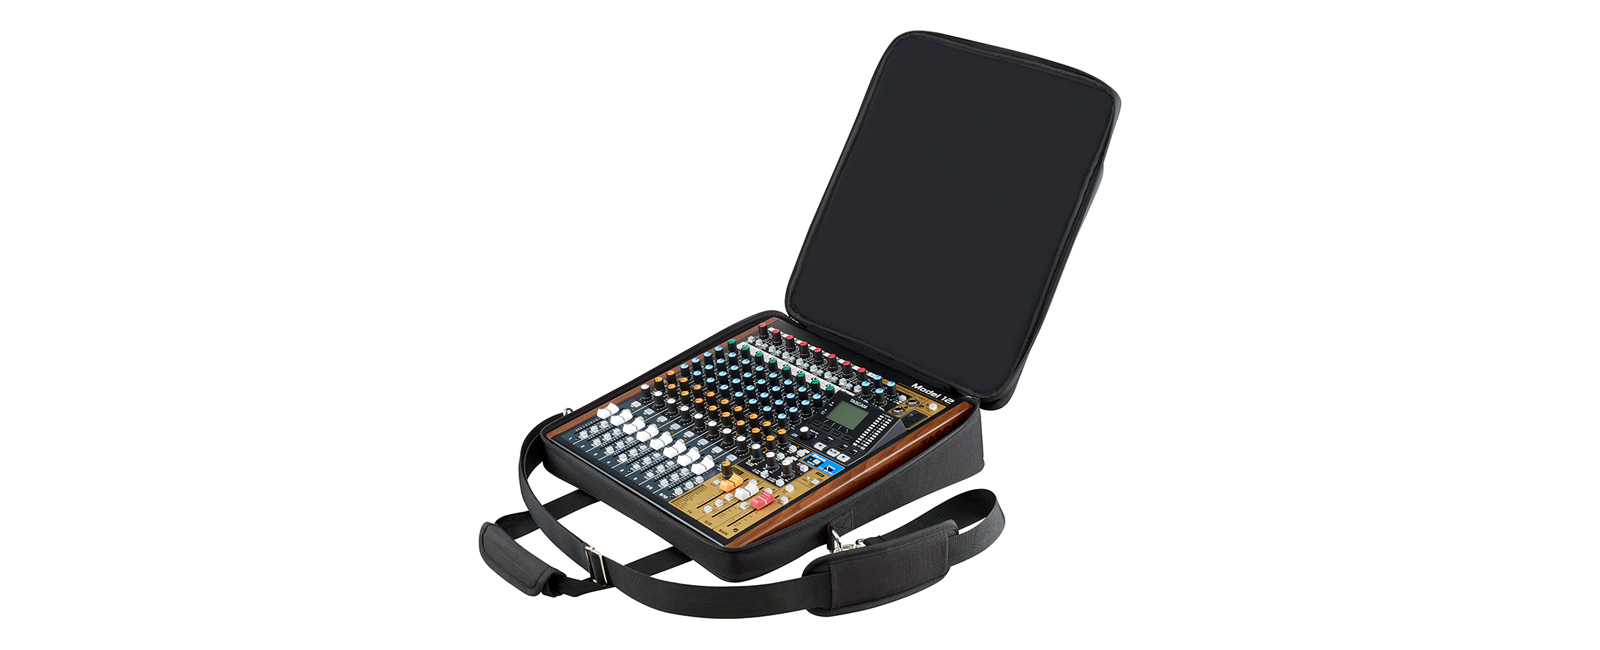 TASCAM Introduces Model 12 Carrying Bag For Multimedia Content Creators